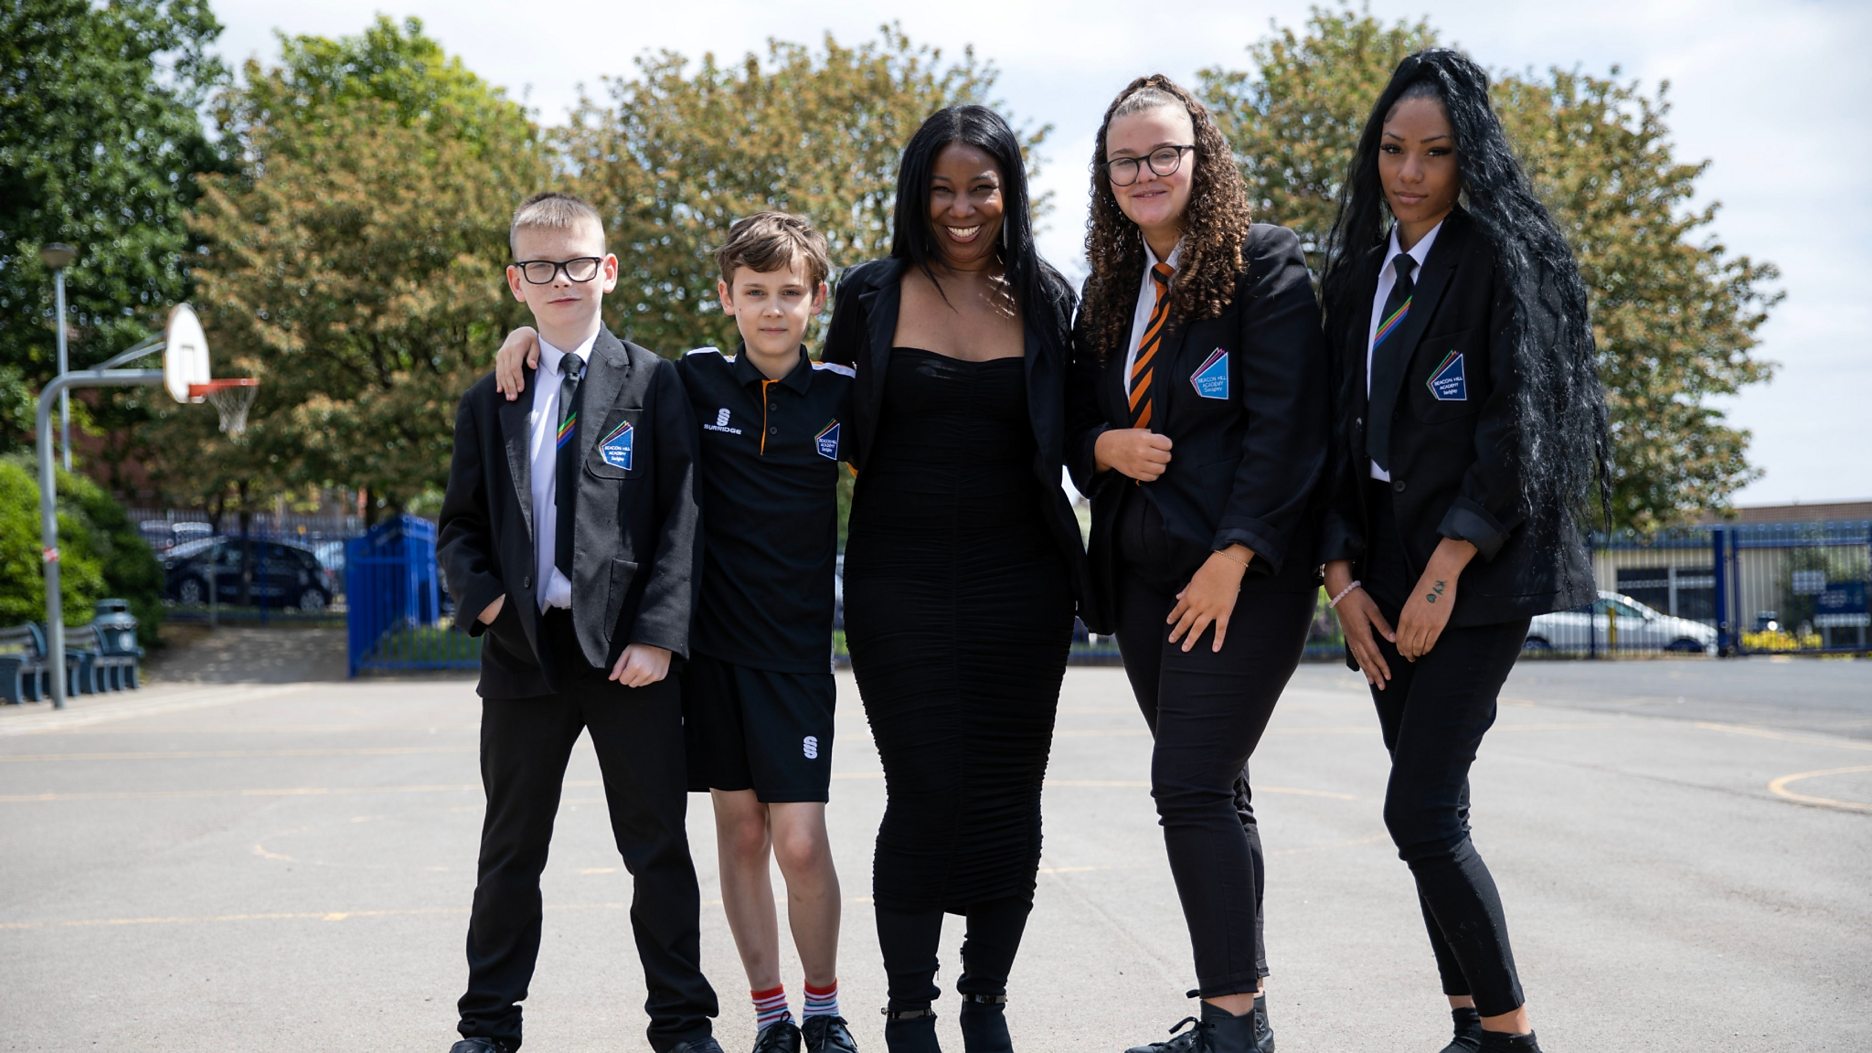 The final episode of Helping Our Teens airs TONIGHT (Thursday) on BBC Two at 9pm